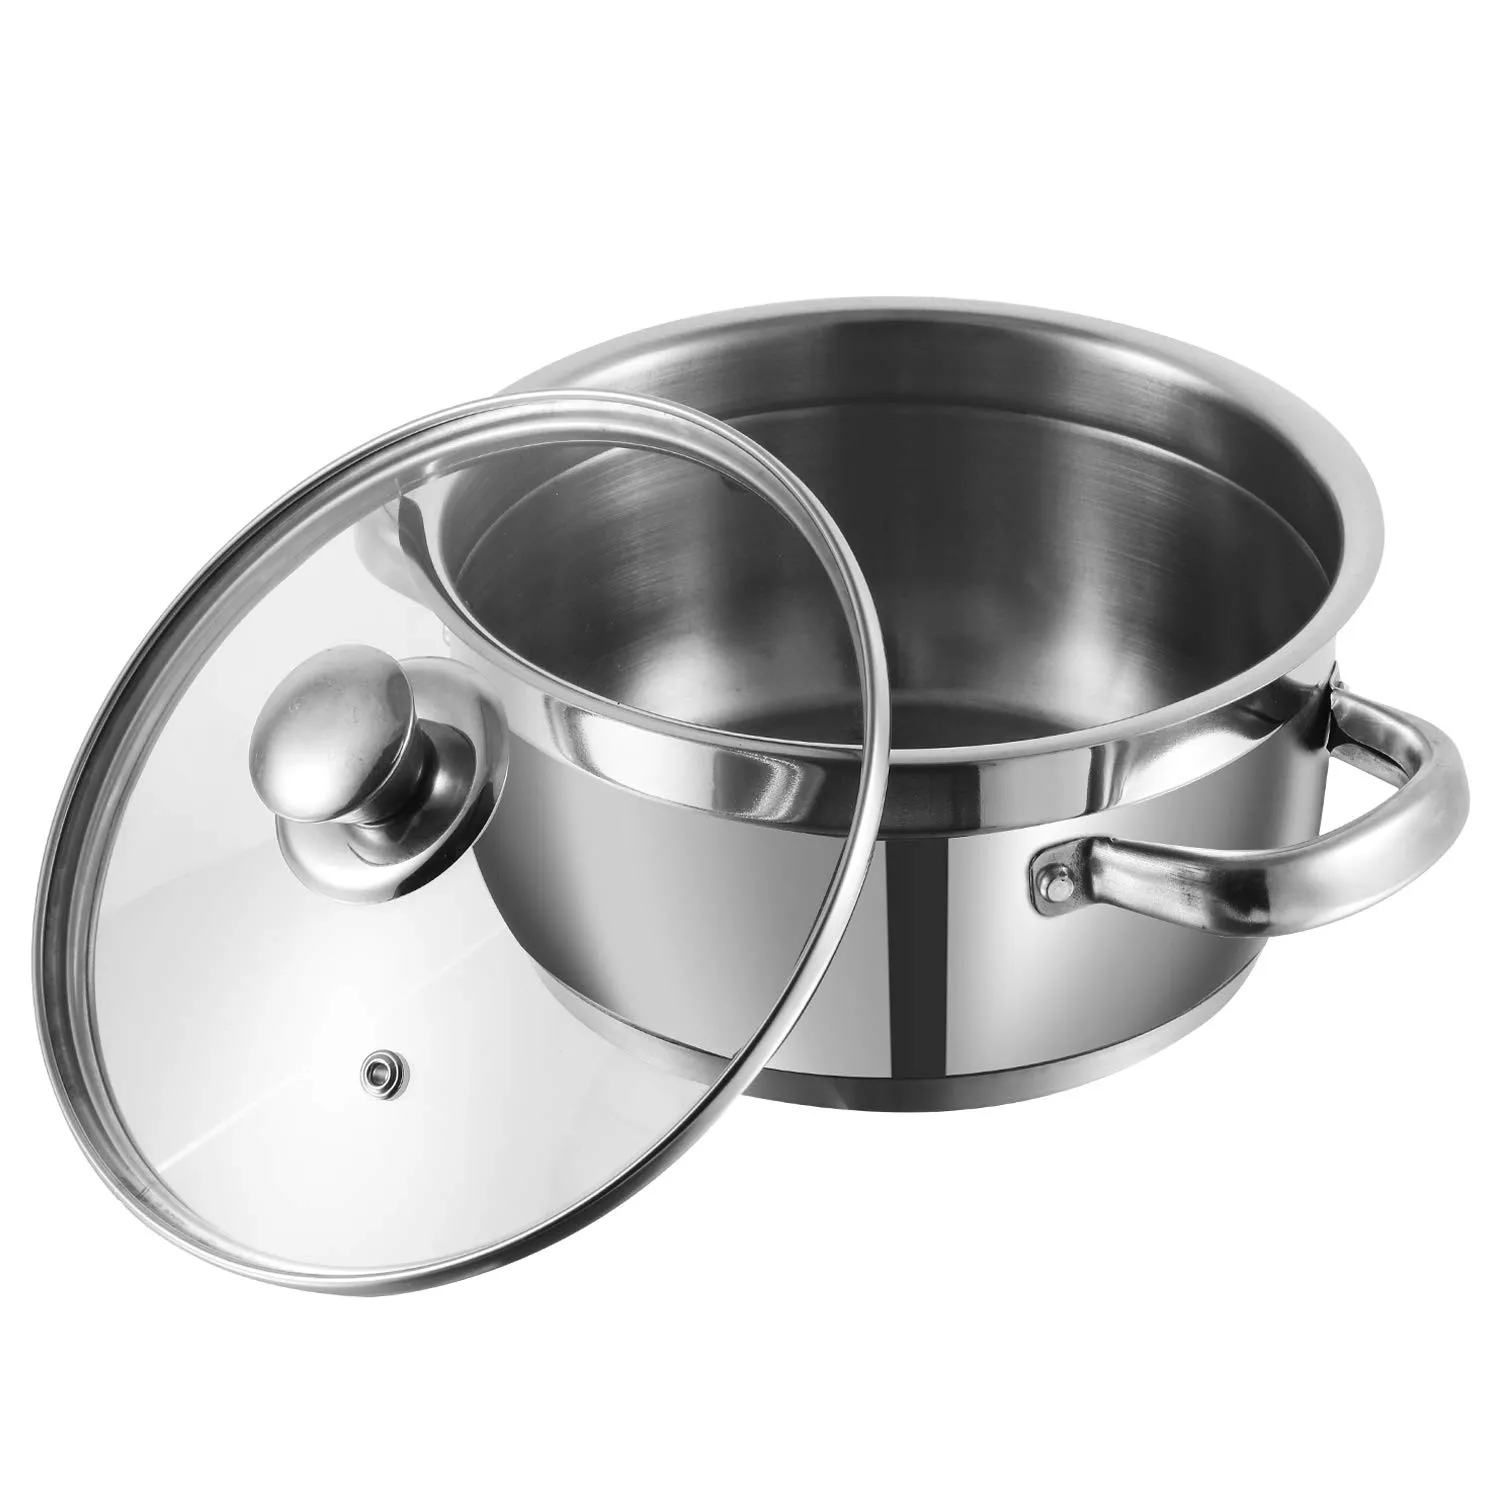 Vinod Stainless Steel Saucepot 18cm 2.3 Litres with Lid (Induction base) 1